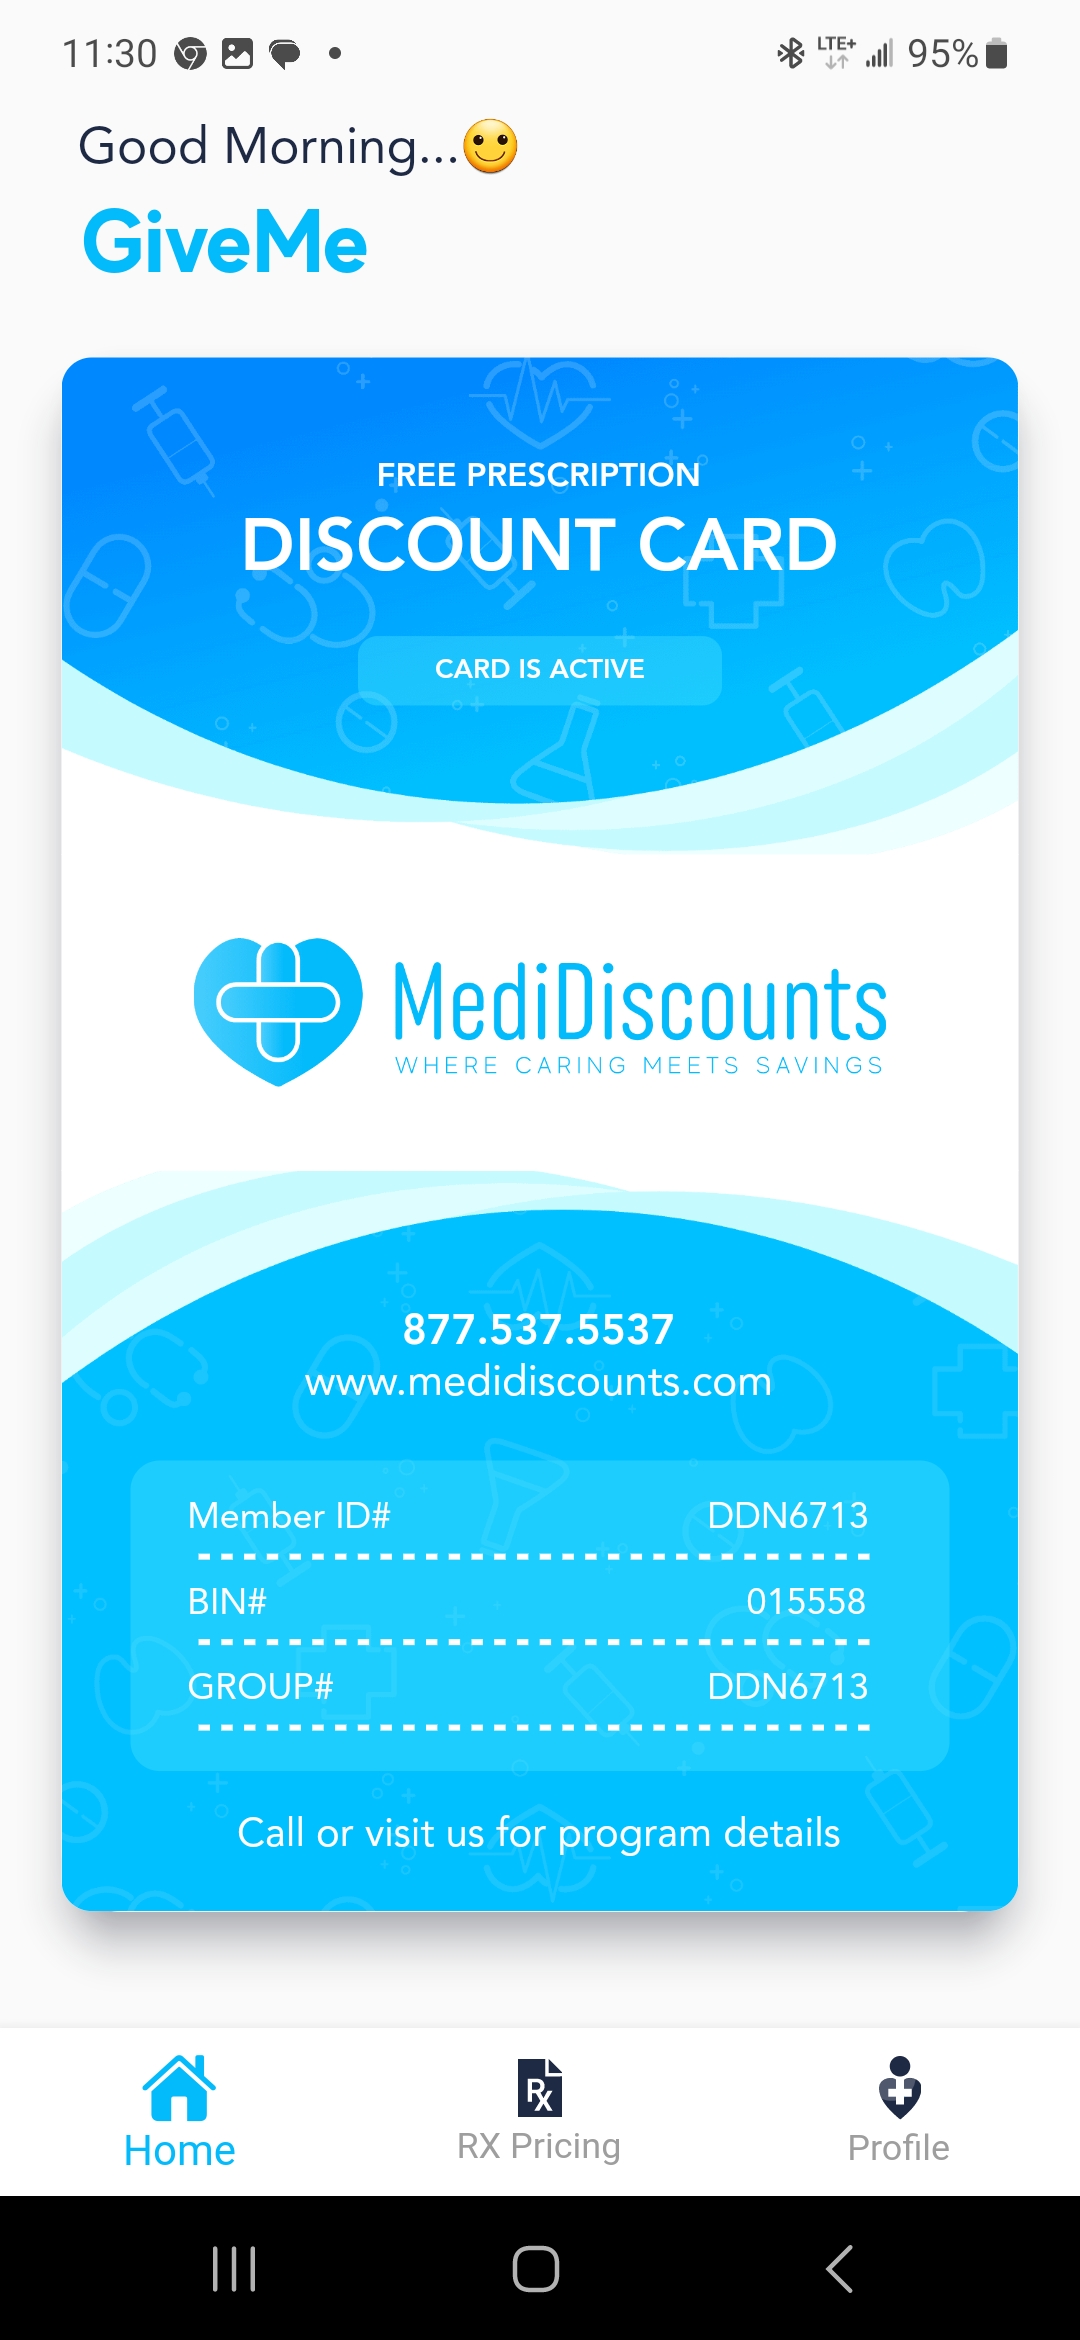 MediDiscounts RX Coupon | Android | GiveMeApps | The Discount Card